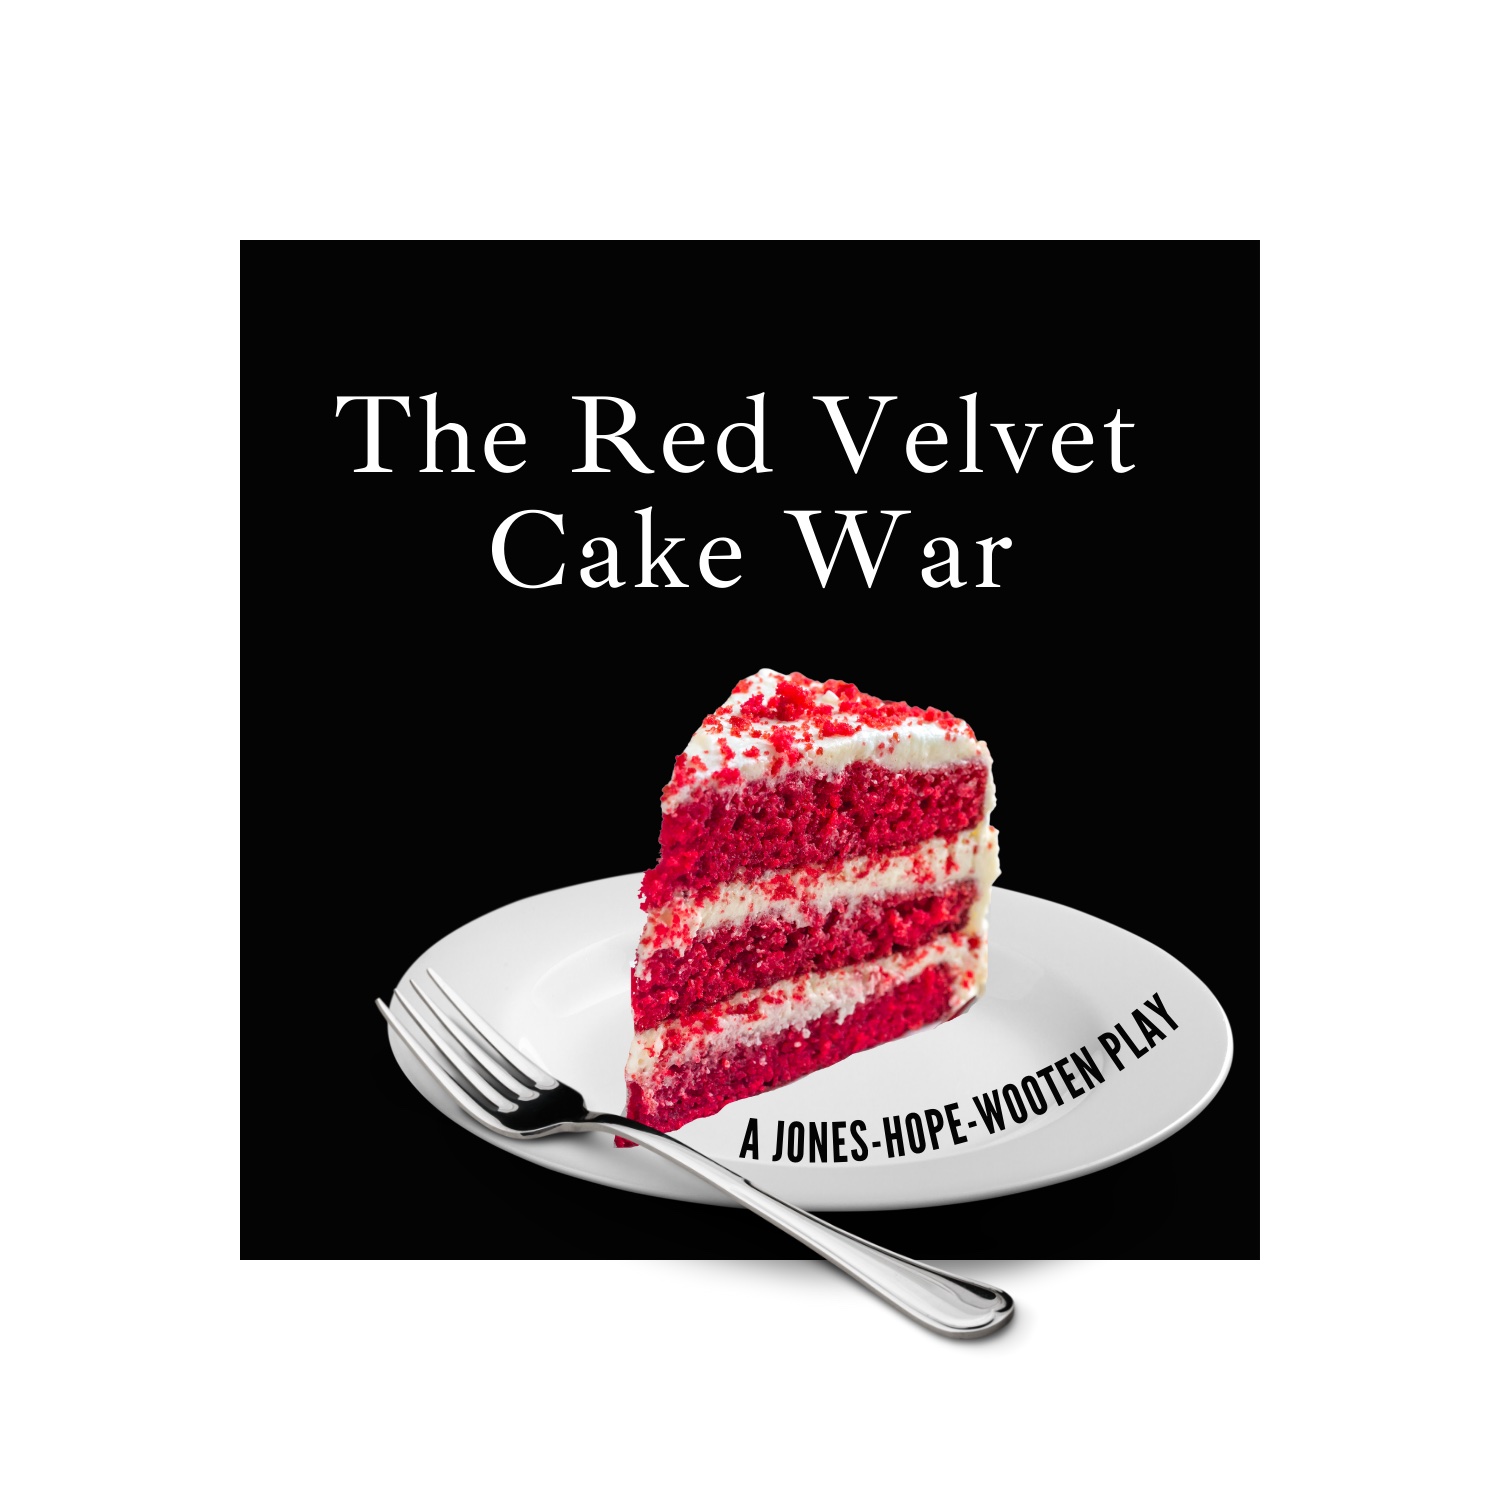 The Red Velvet Cake War by Georgetown Palace Theatre